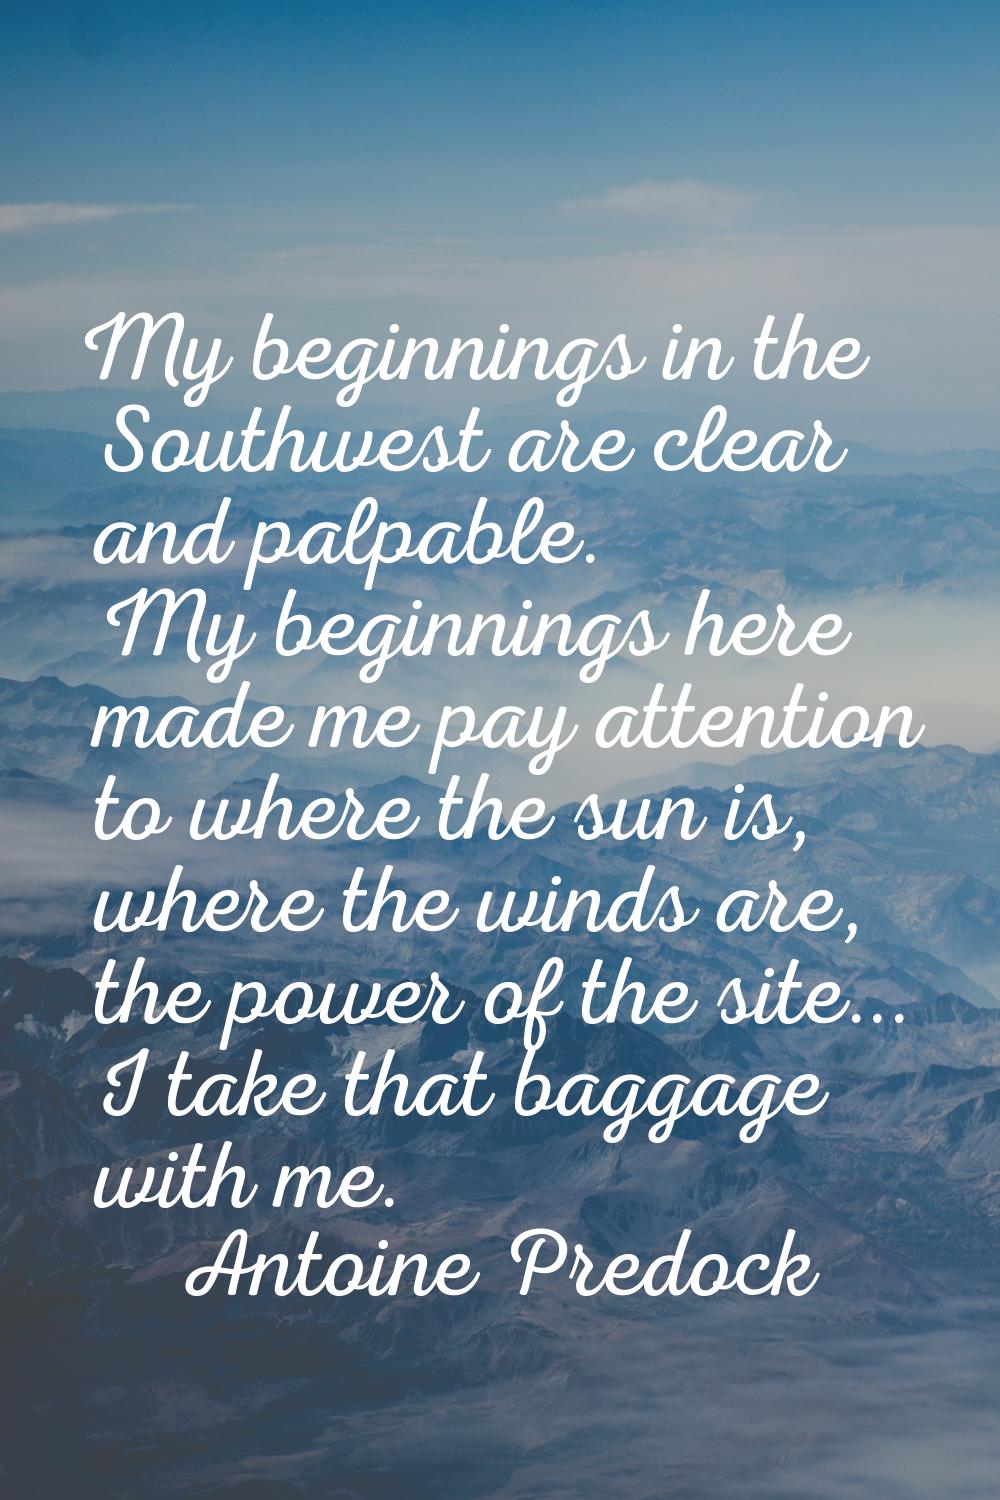 My beginnings in the Southwest are clear and palpable. My beginnings here made me pay attention to 